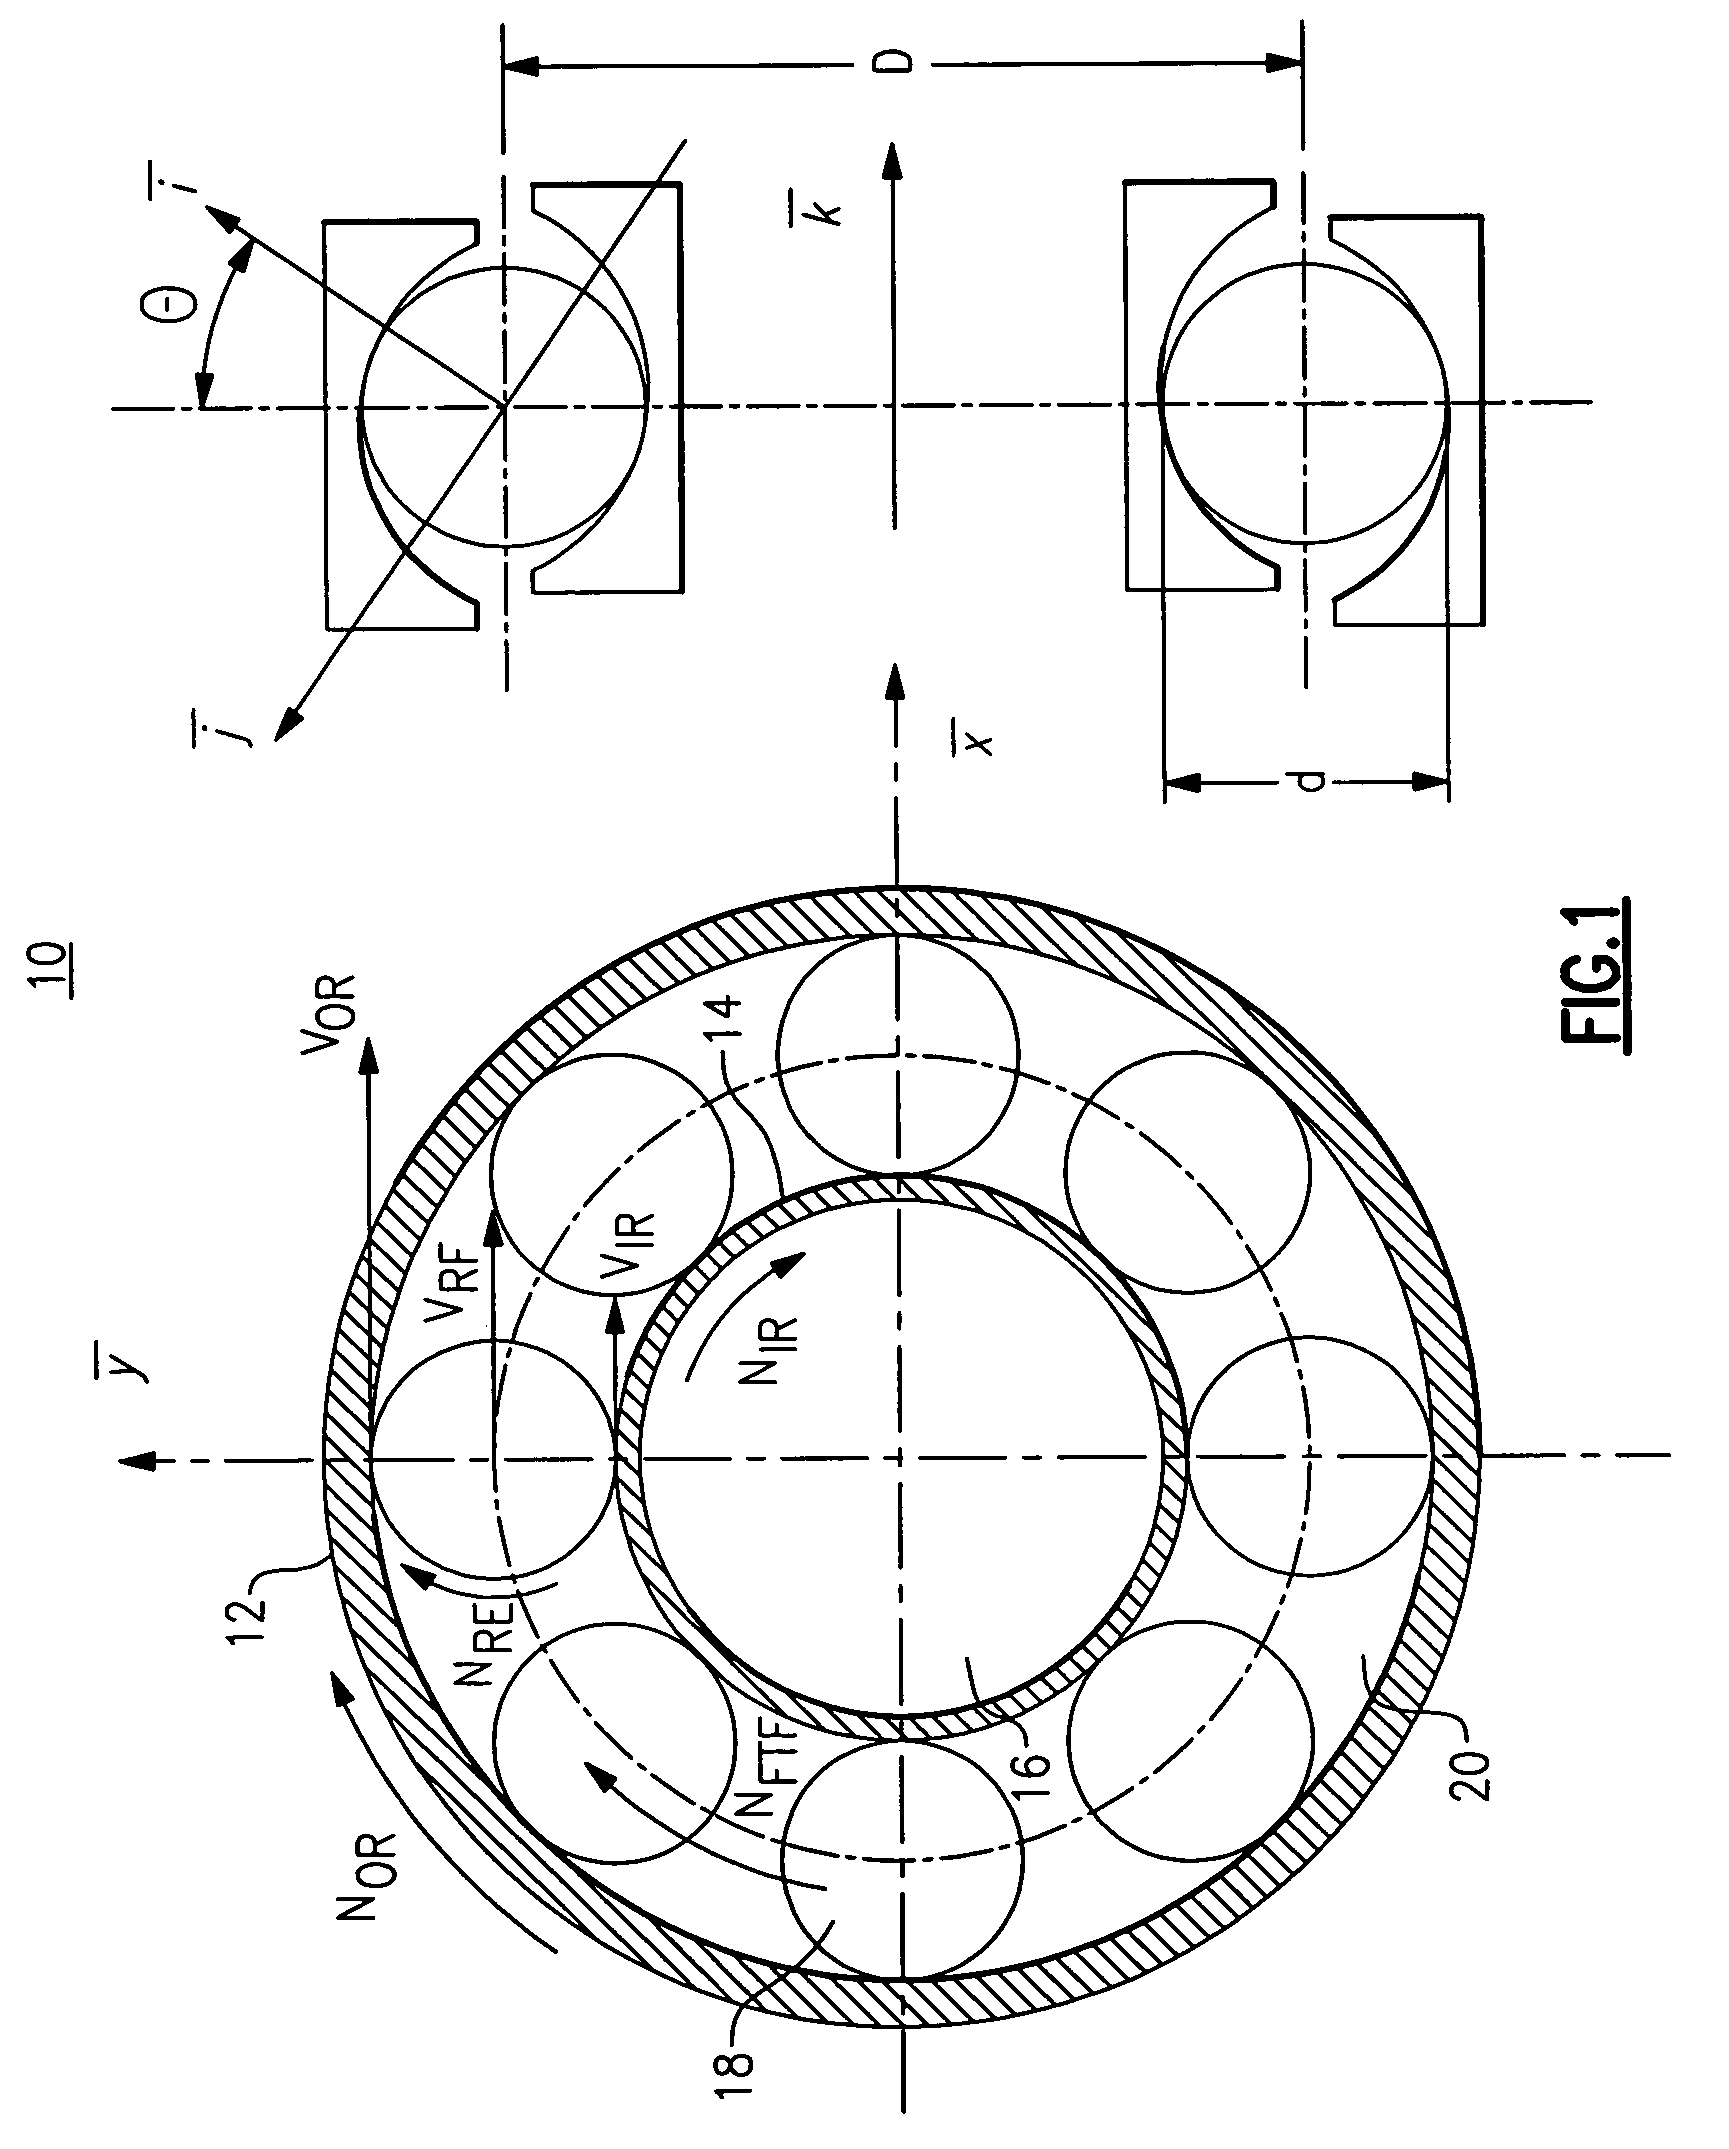 Synthesized synchronous sampling and acceleration enveloping for differential bearing damage signature